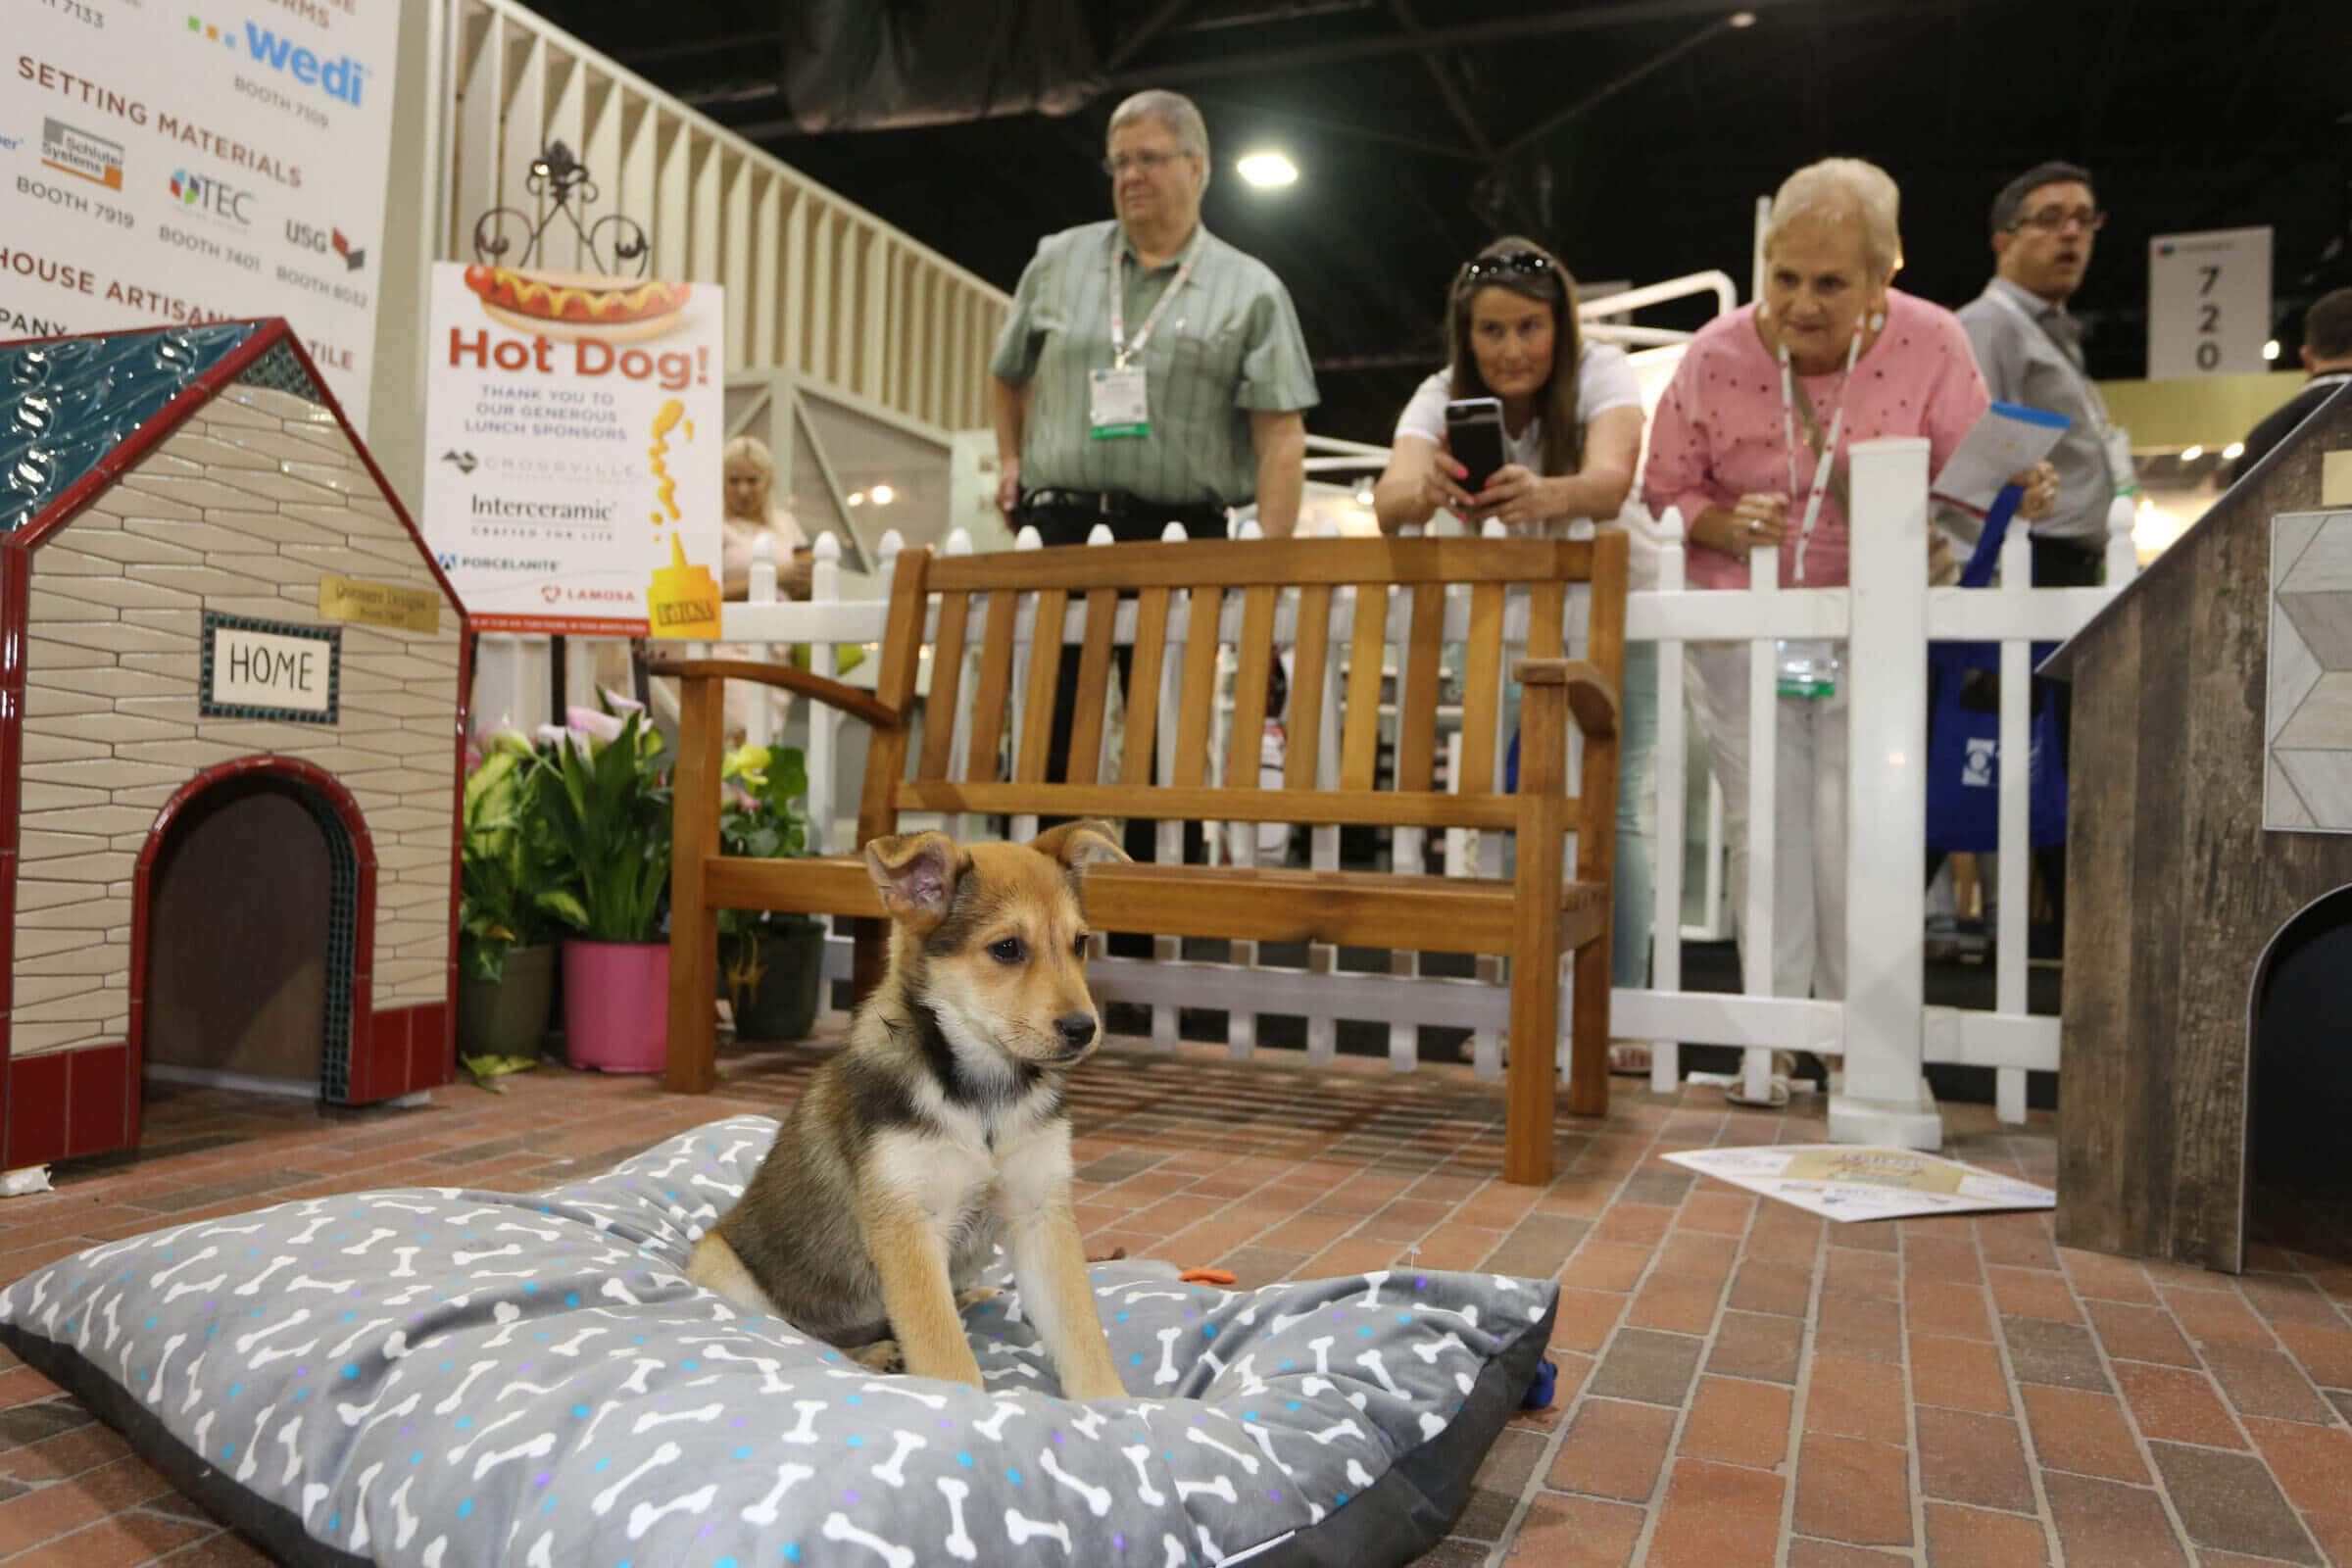 A few Coverings attendees admiring a small puppy on a pillow next to a tile-decorated doghouse.